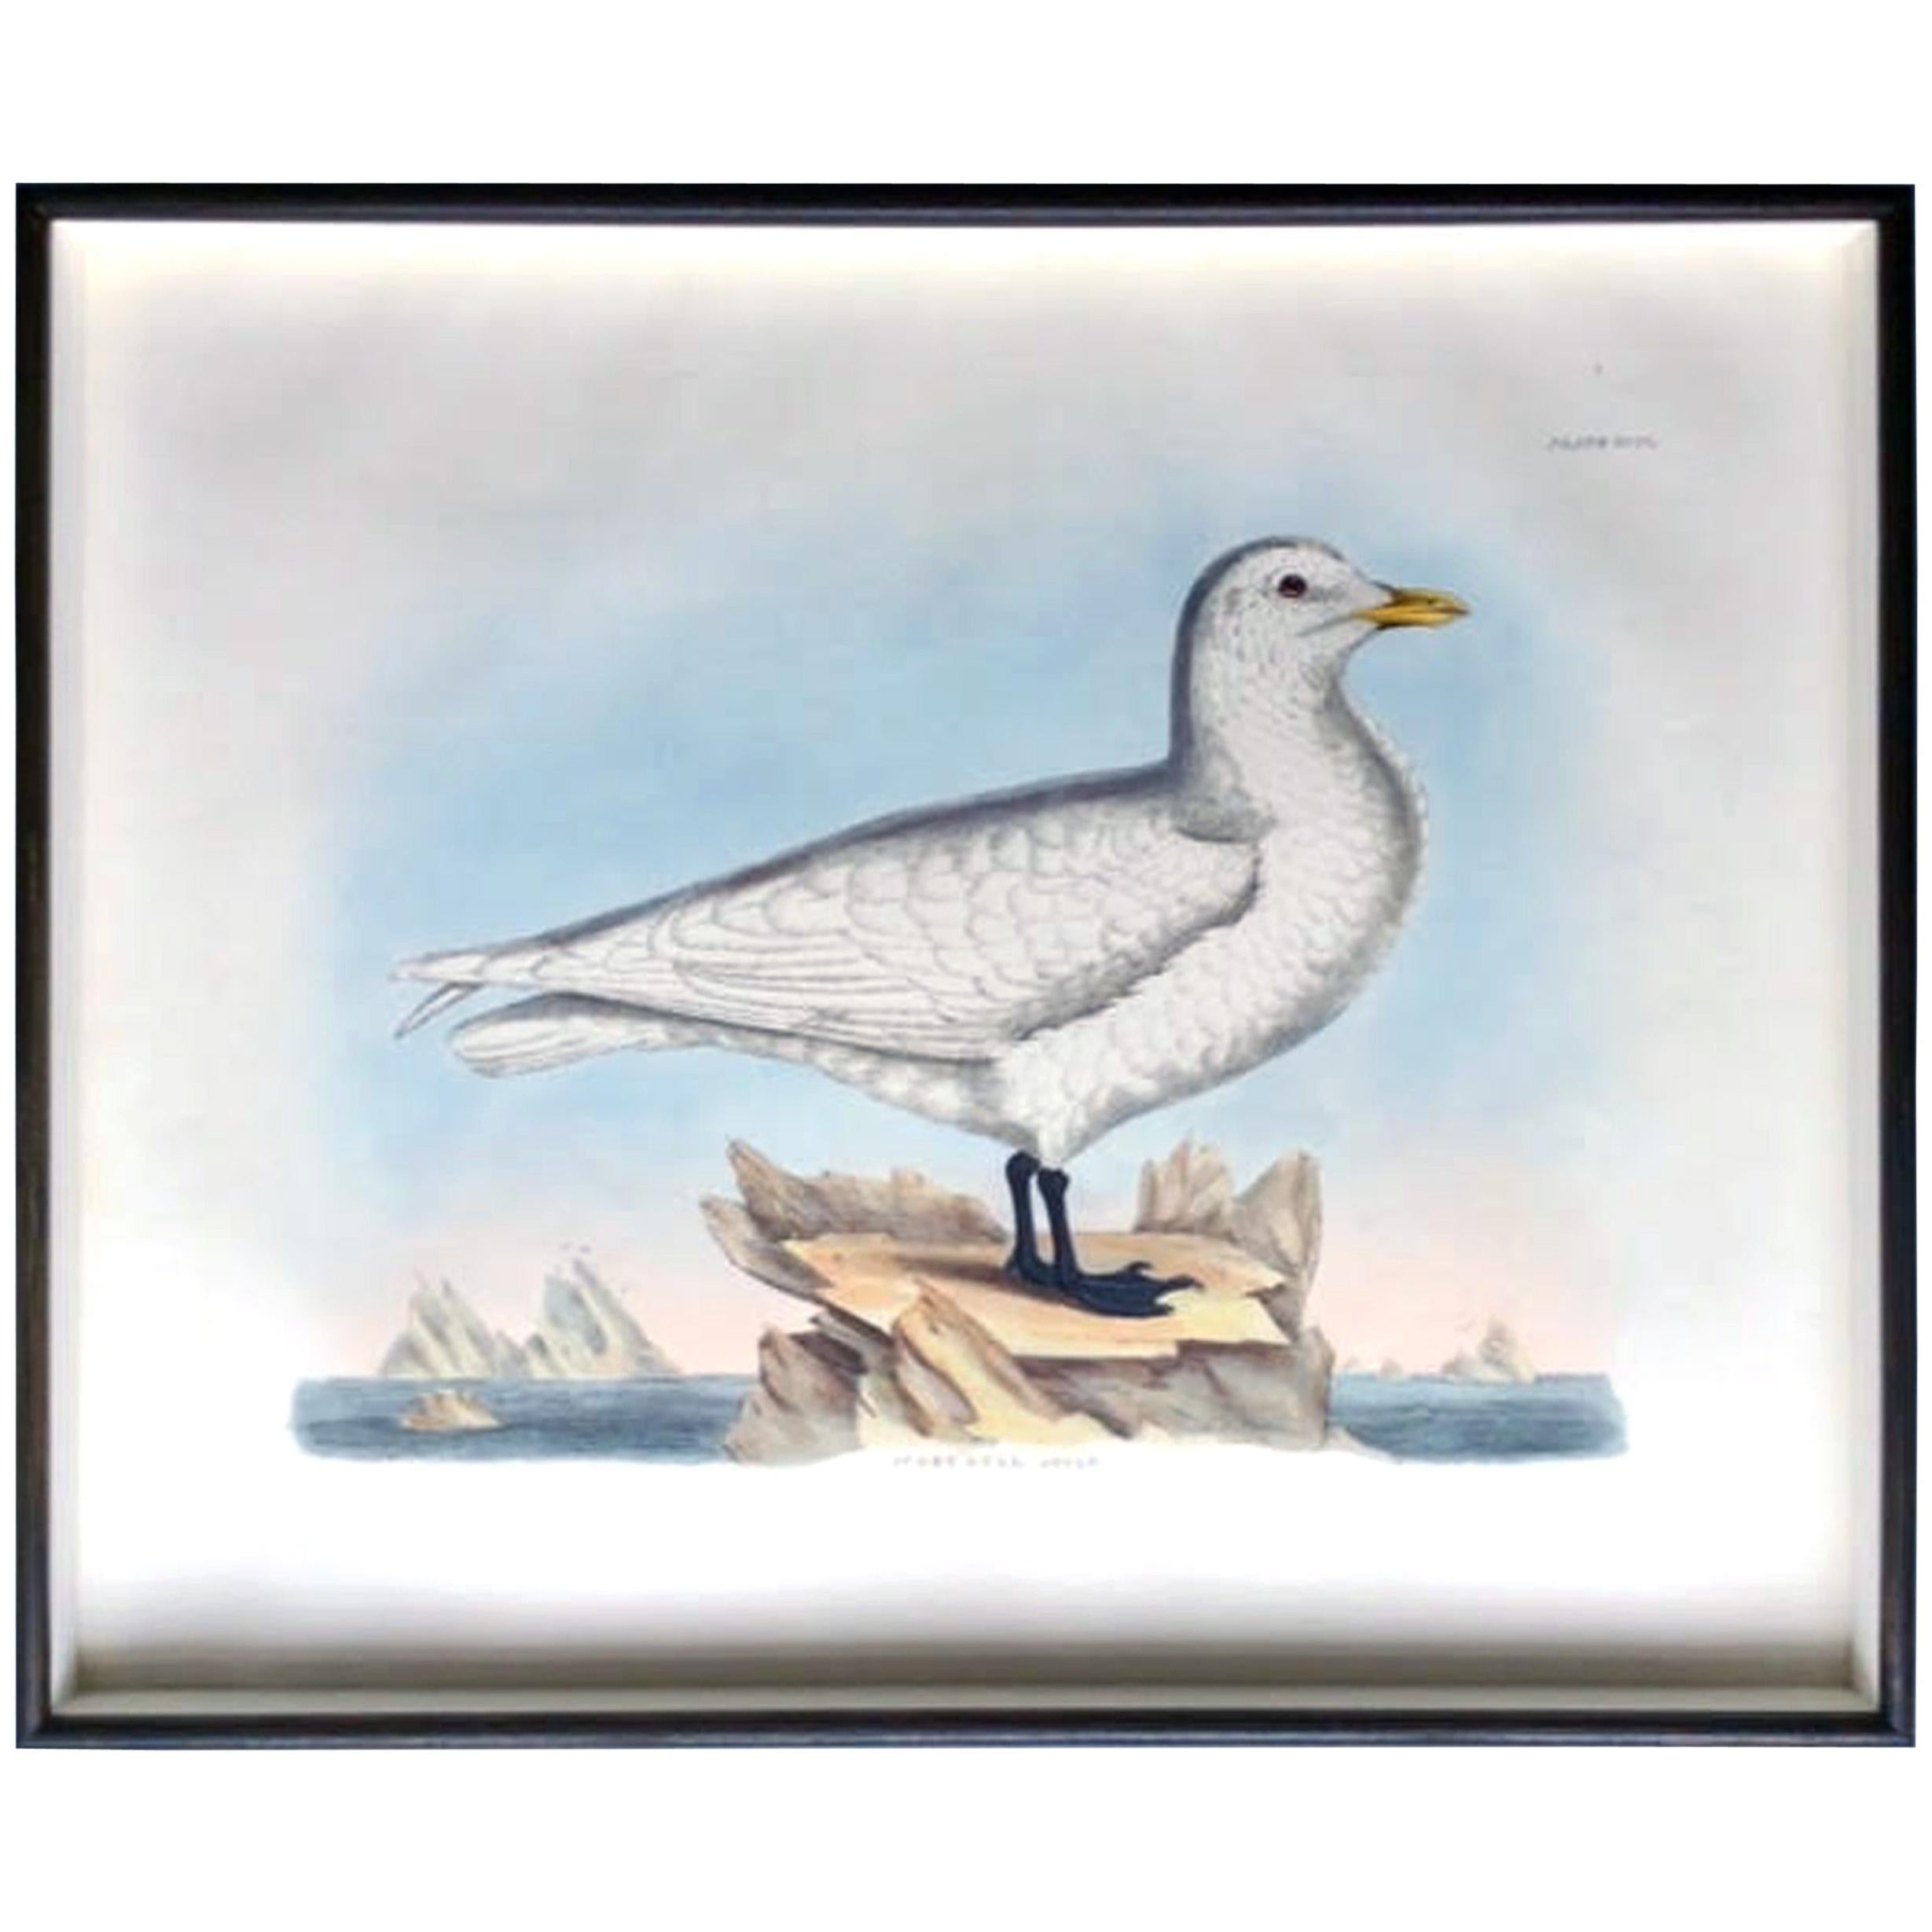 Prideaux John Selby Large Hand Colored Copper Plate Engraving of a Seagull